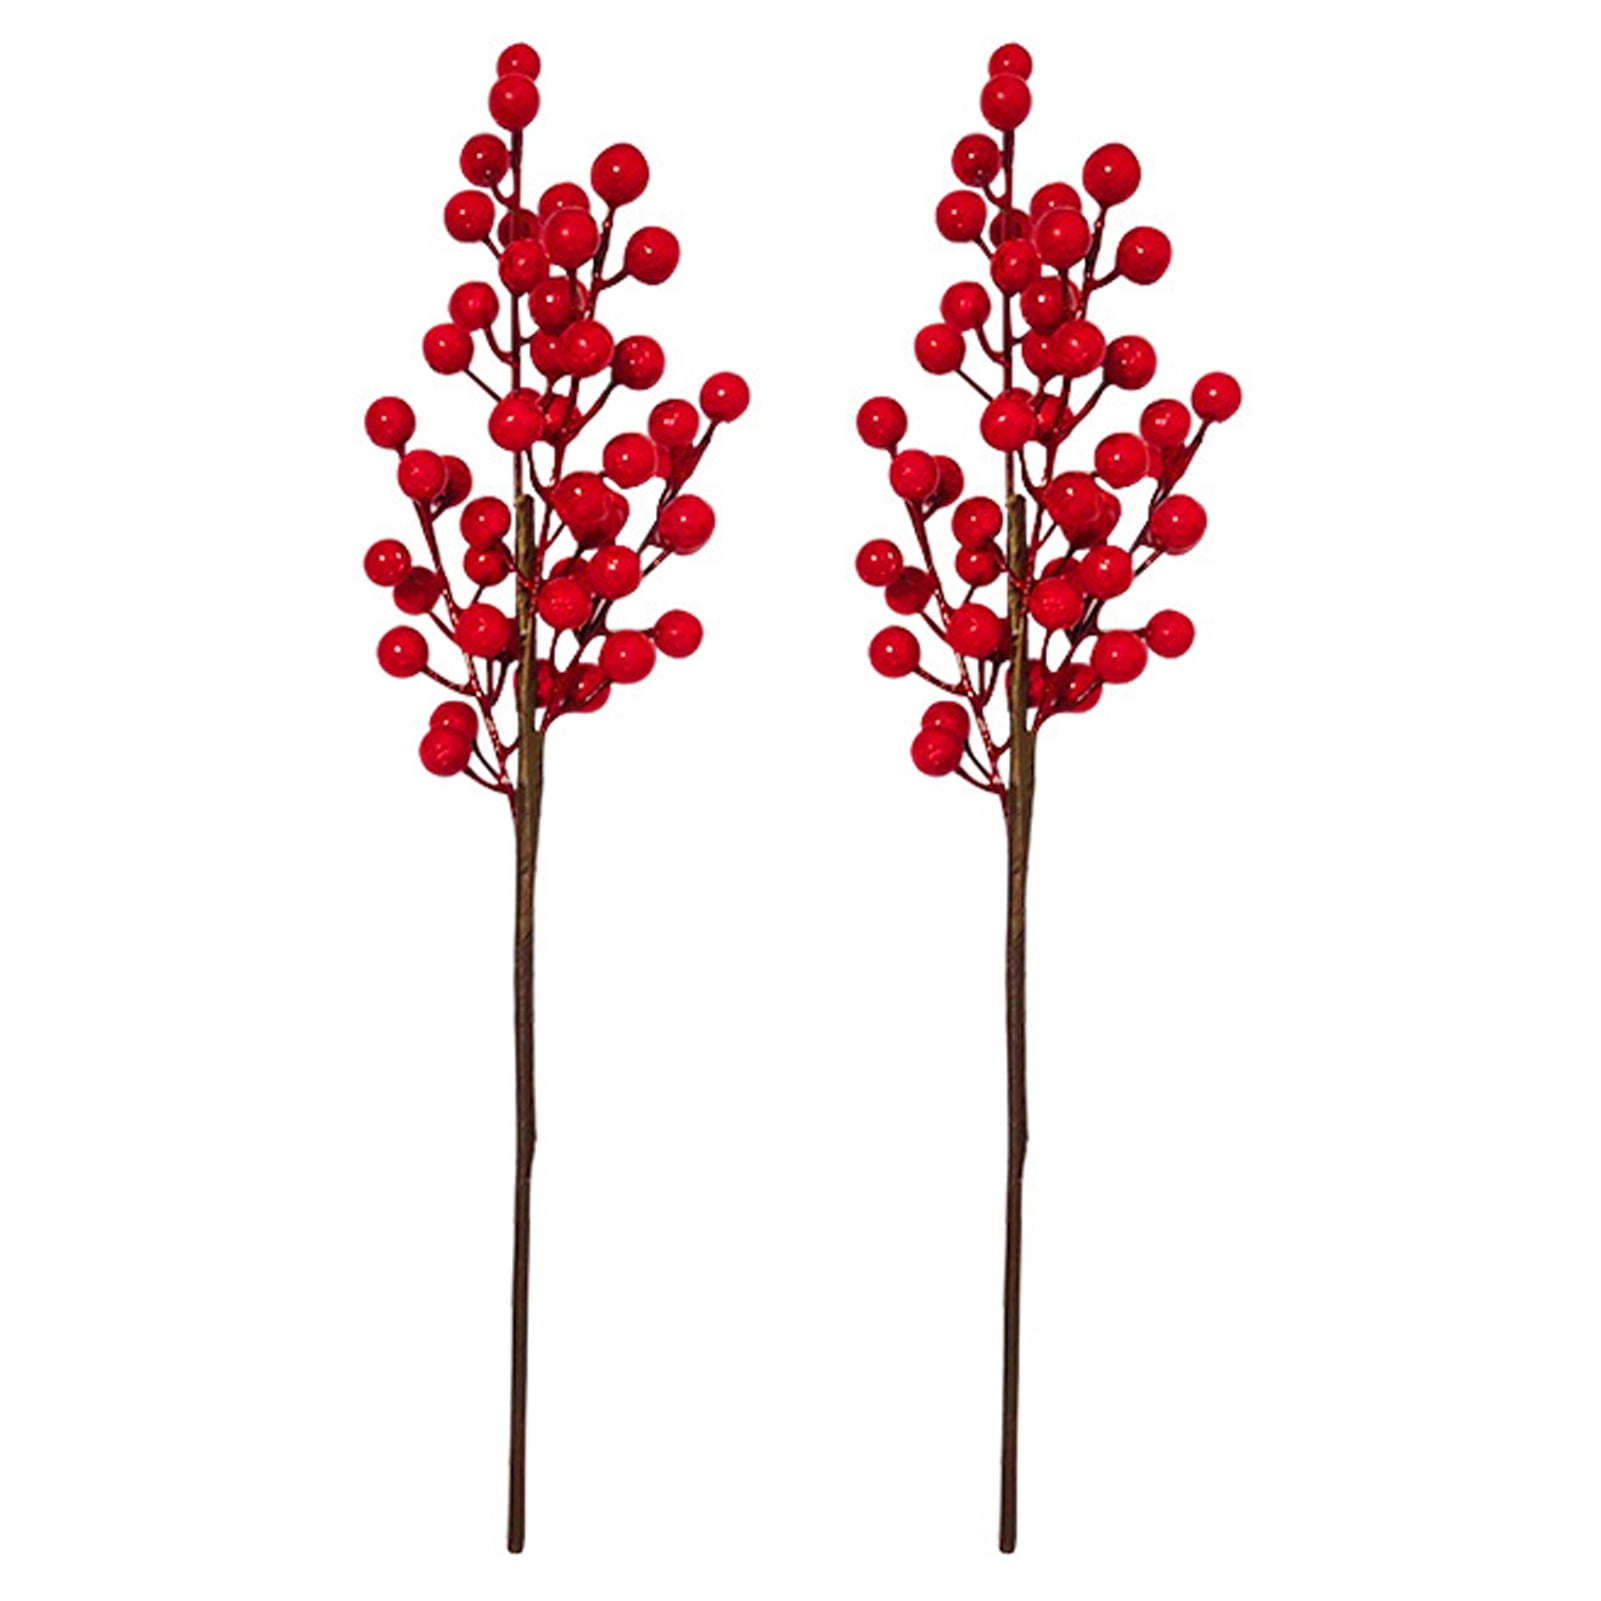 TOPOINT 2Packs Artificial Red Berry Stems Branches, Fake Burgundy Berry ...